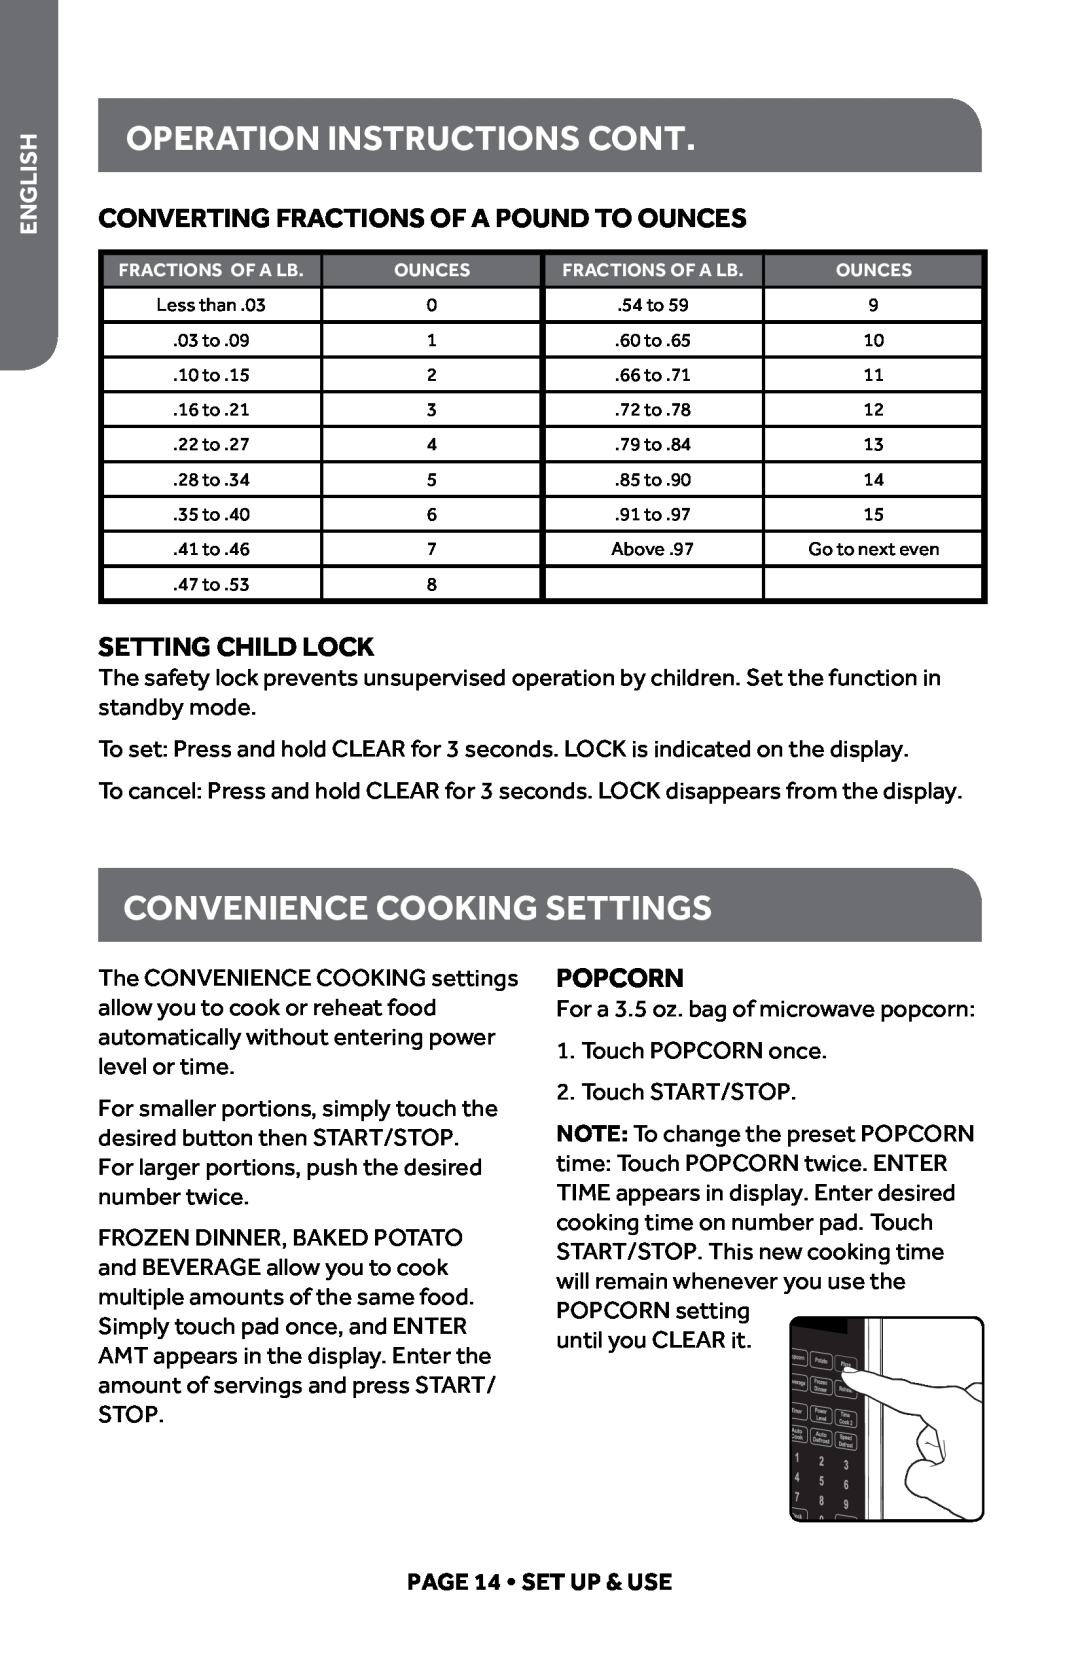 Haier HMC0903SESS Operation Instructions cont, CONVENIENCE COOKING Settings, Converting Fractions of a Pound to Ounces 